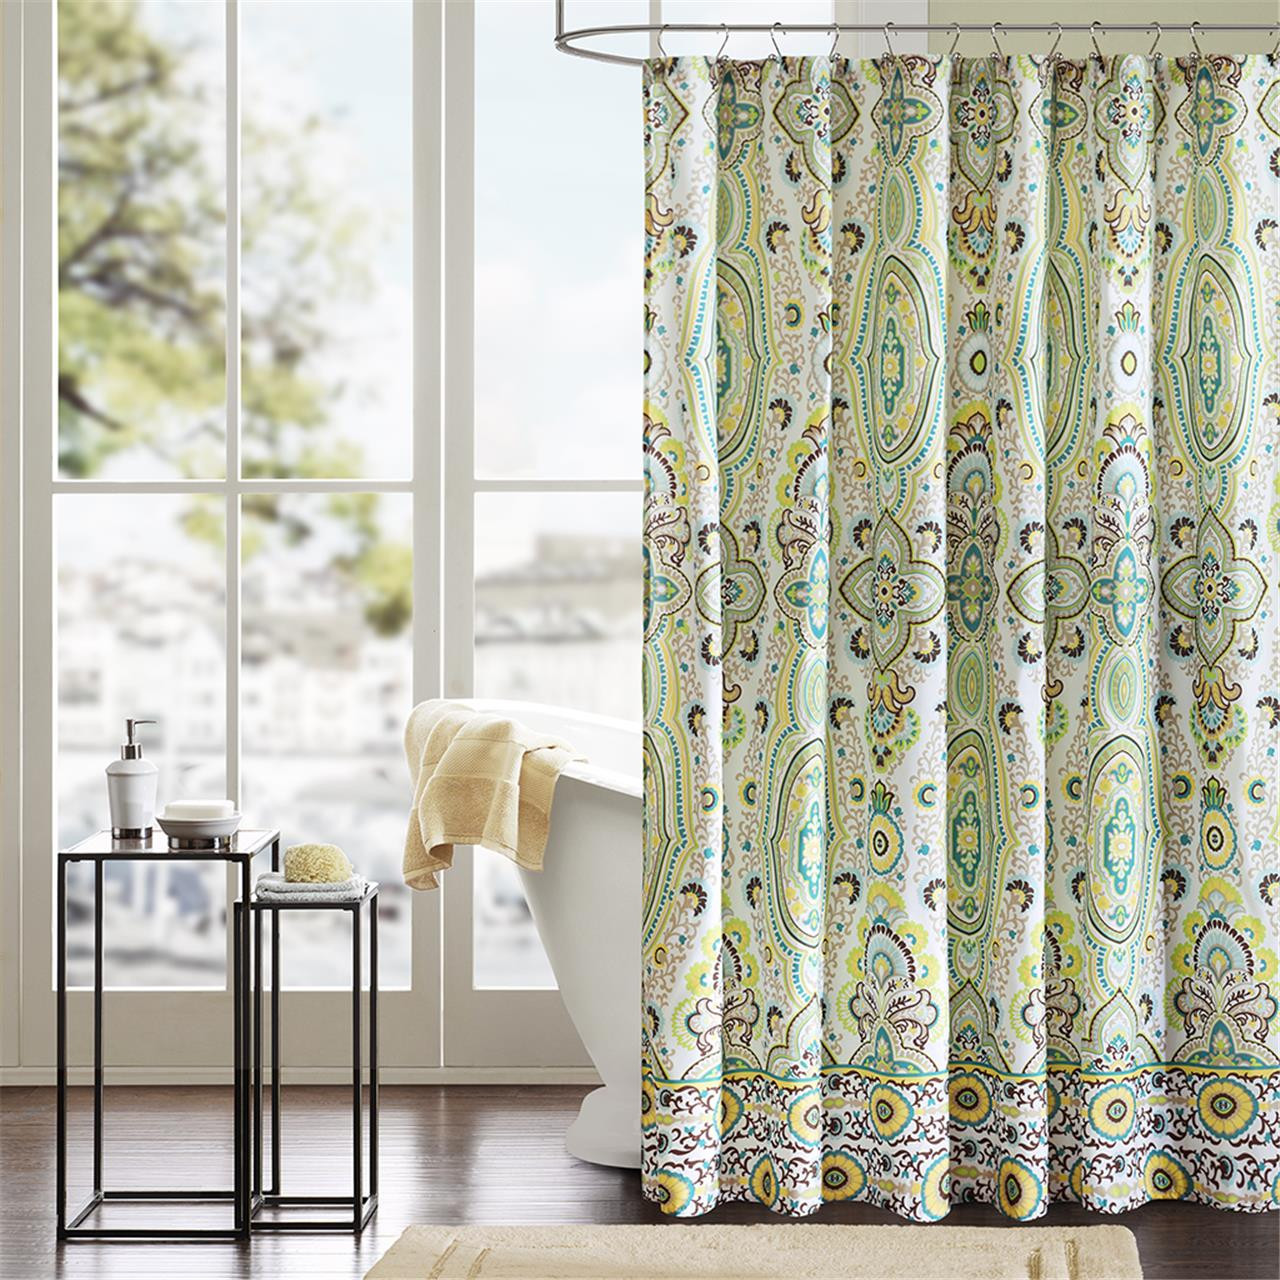 Bathroom Shower Curtains
 Unique Shower Curtains To Give Your Bathroom A Unique Look